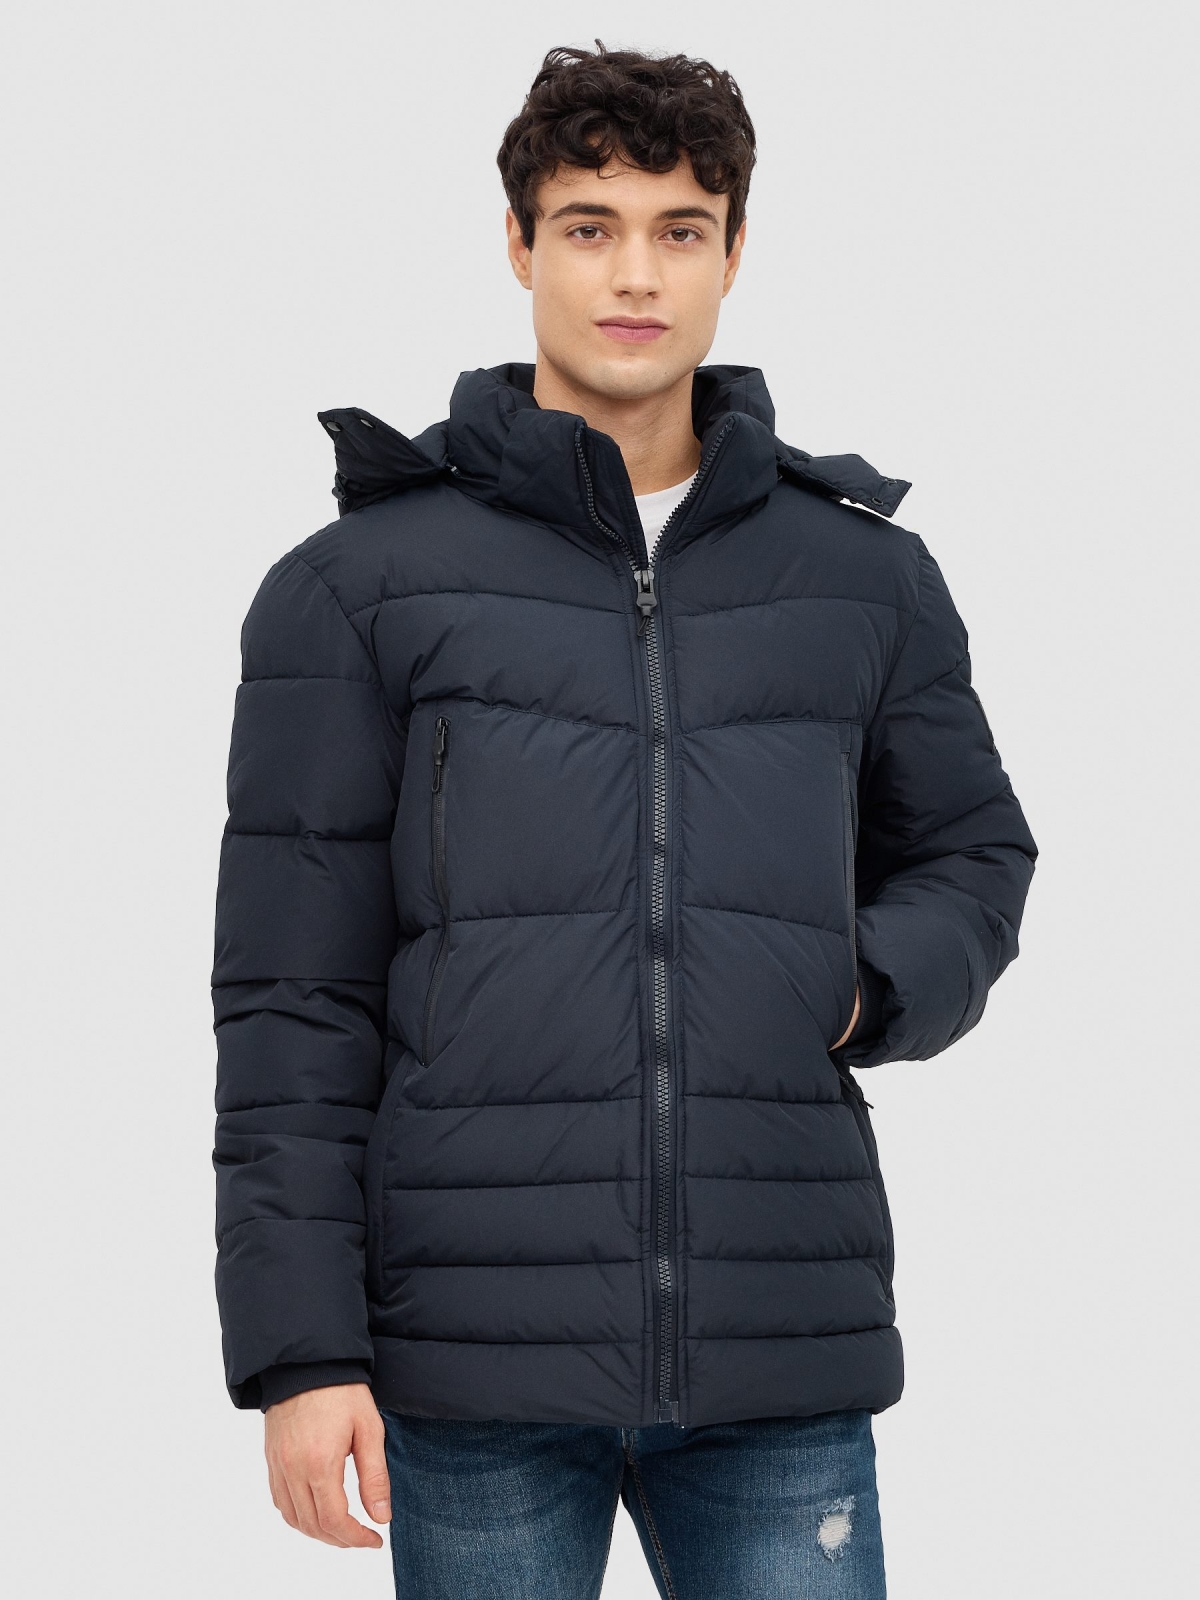 Nylon coat with zippered pockets blue middle front view